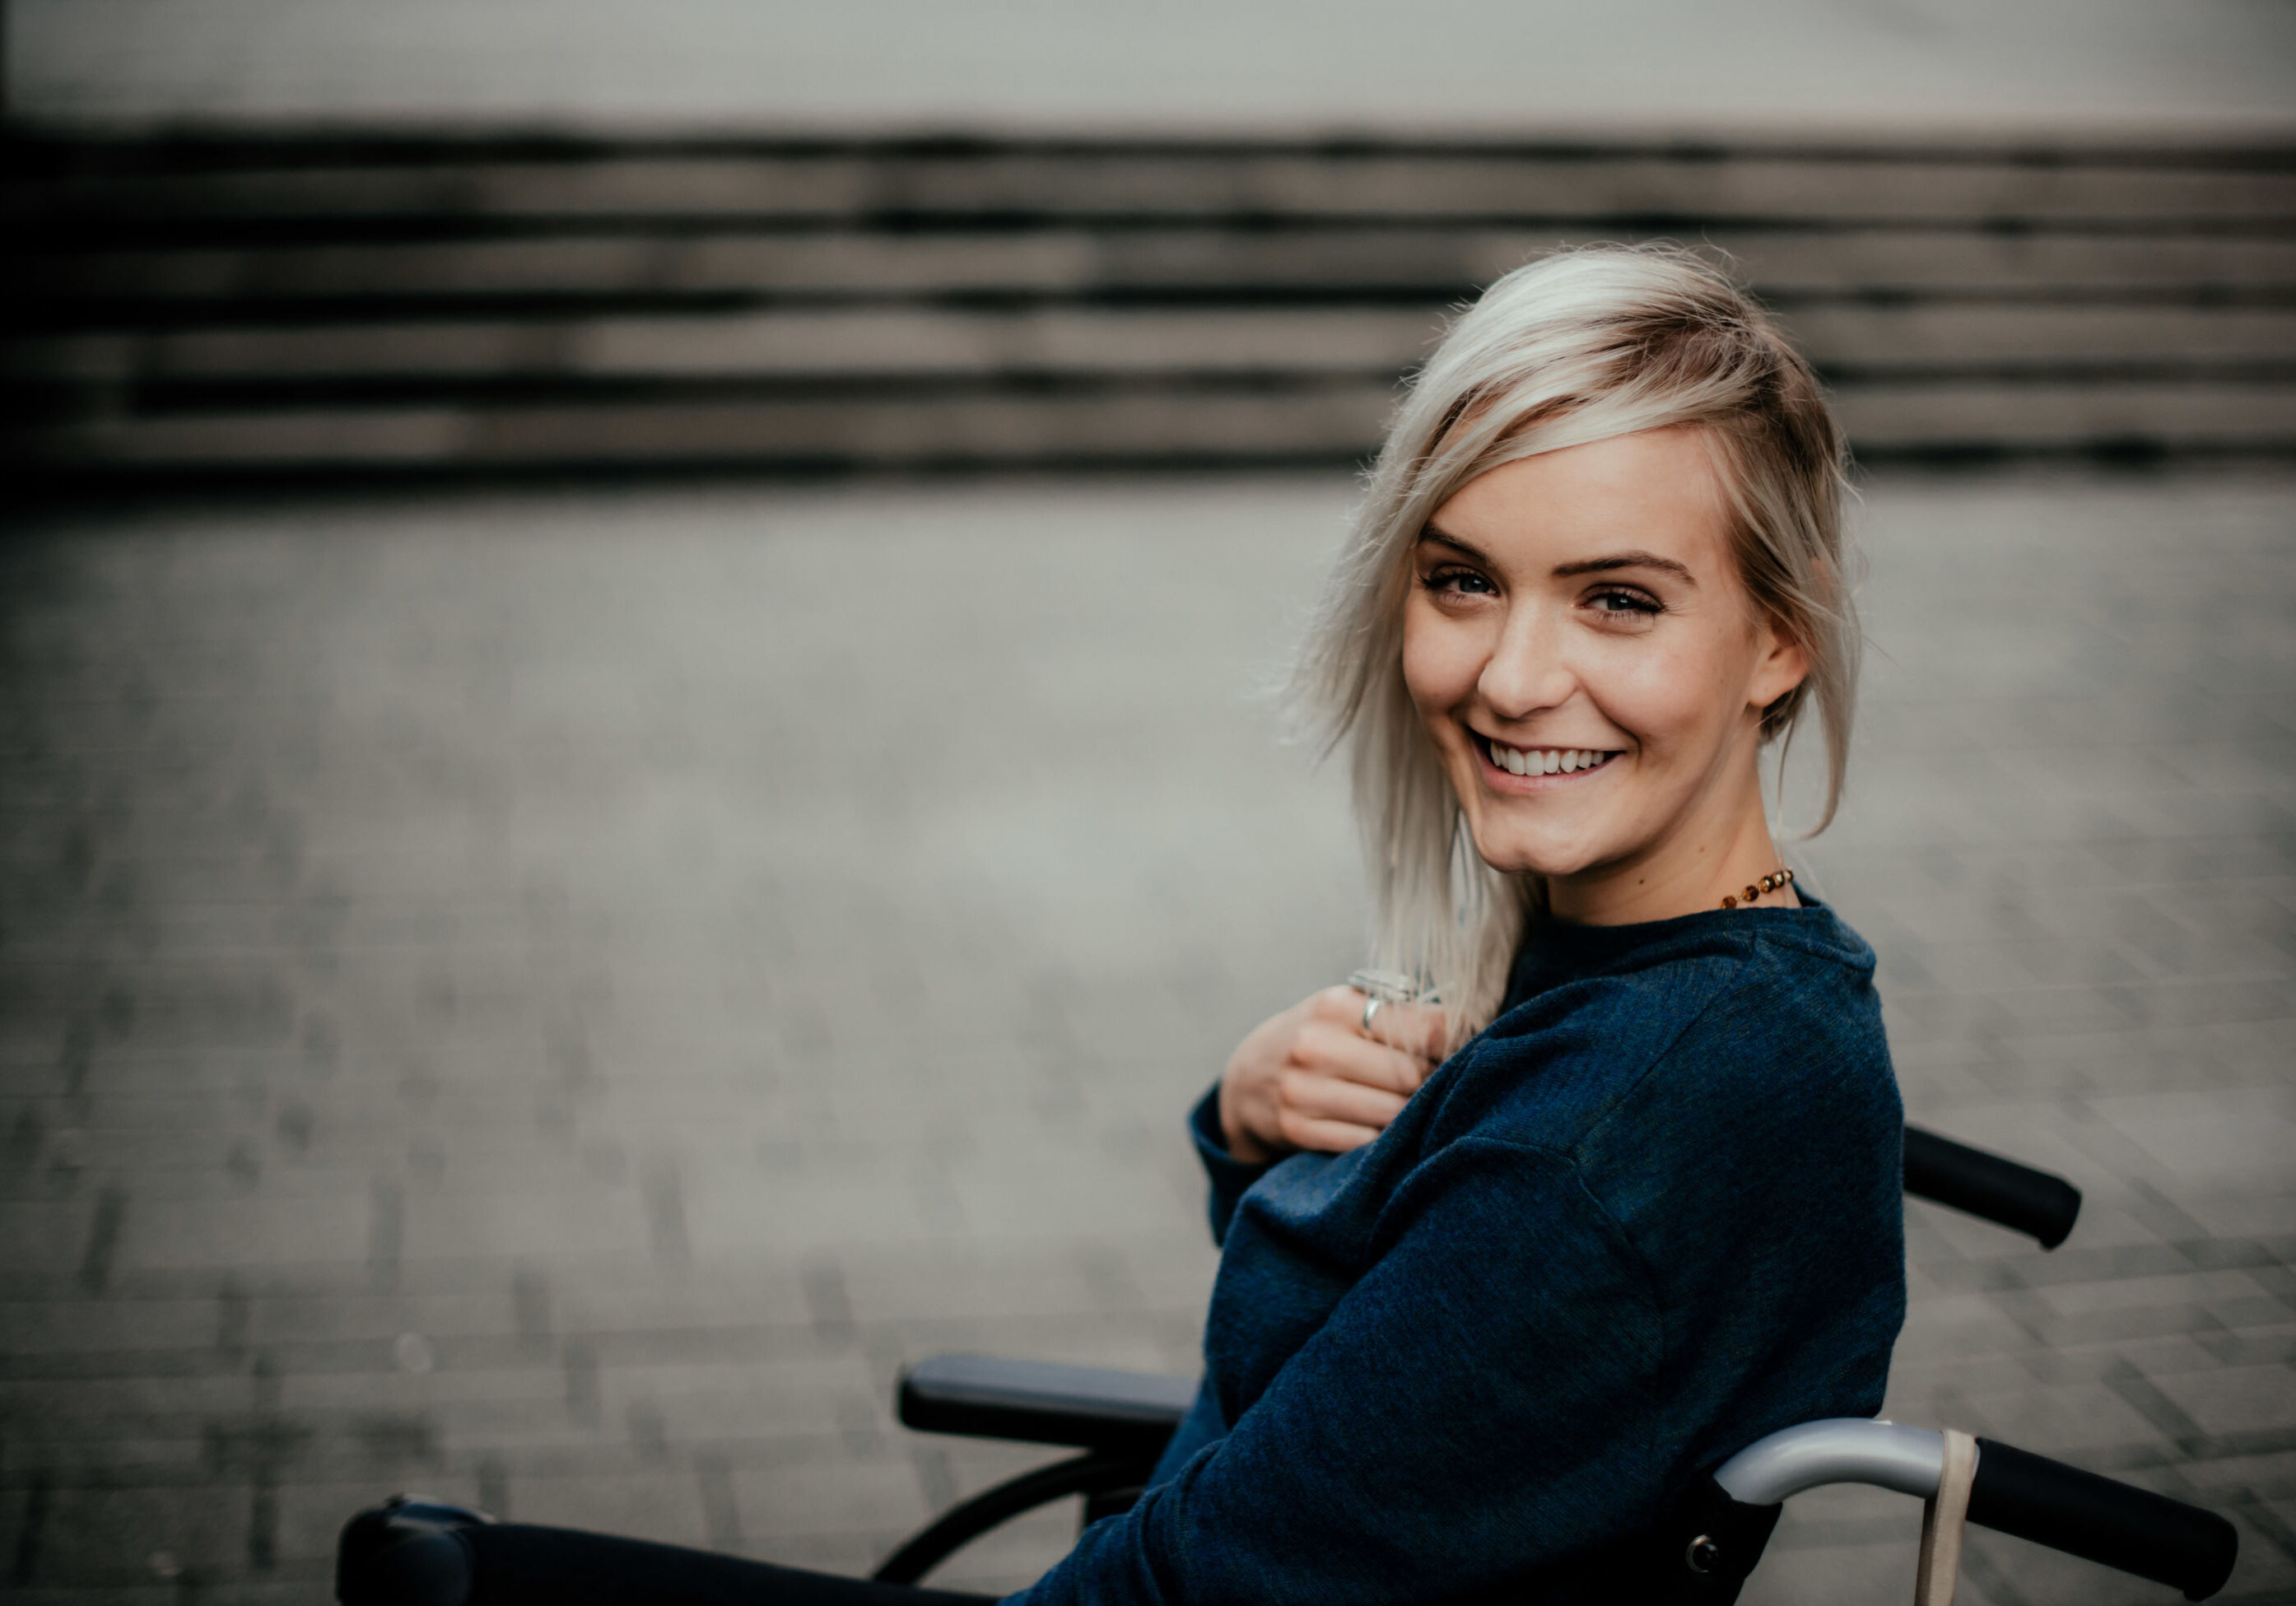 Portrait Of A Happy Blonde Girl In A Wheelchair